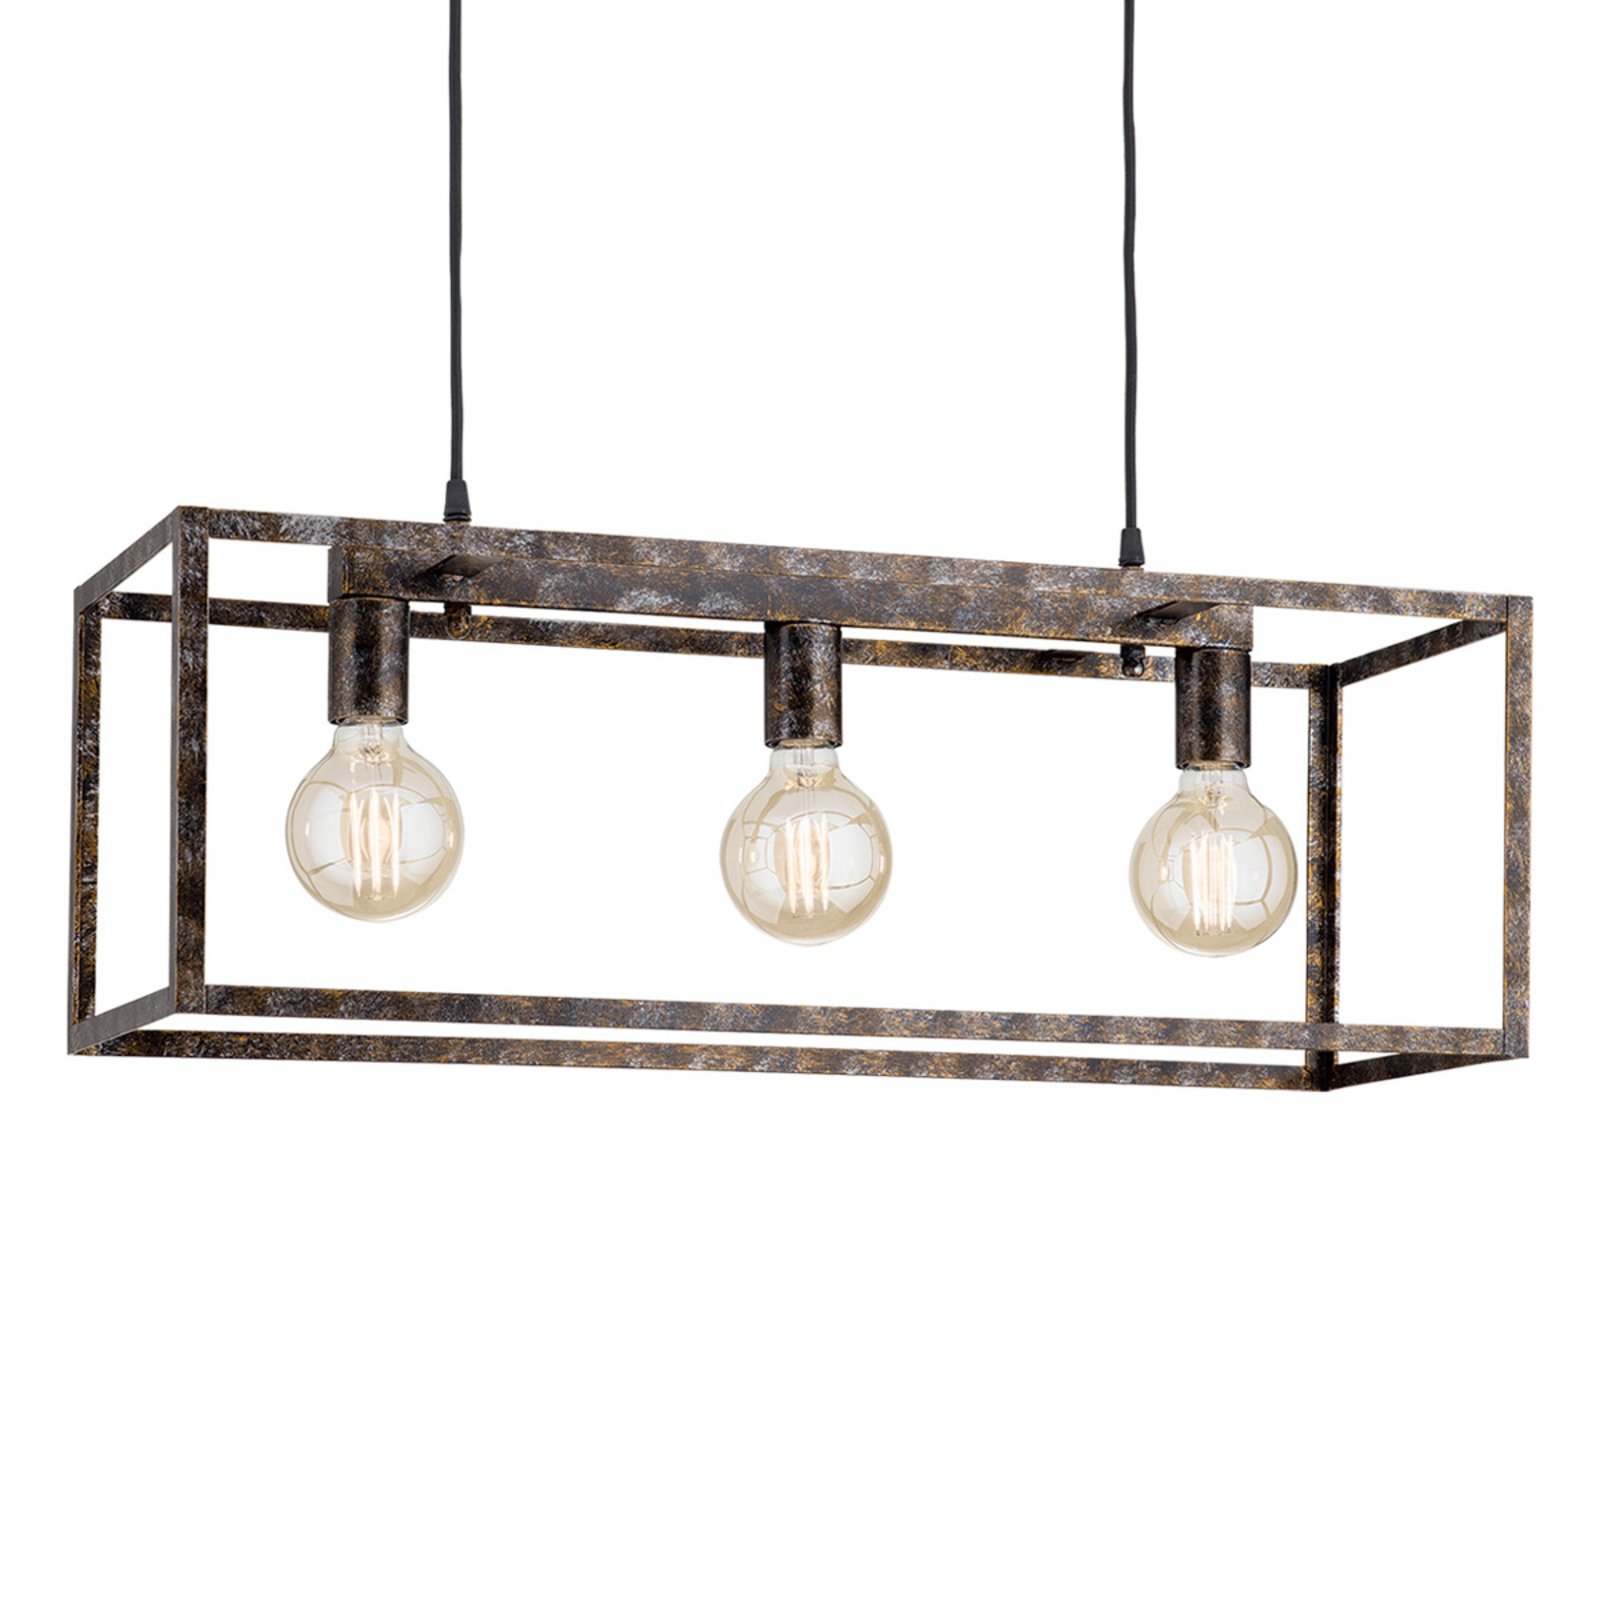 Hanglamp Cage in roest-optiek 3 lamps